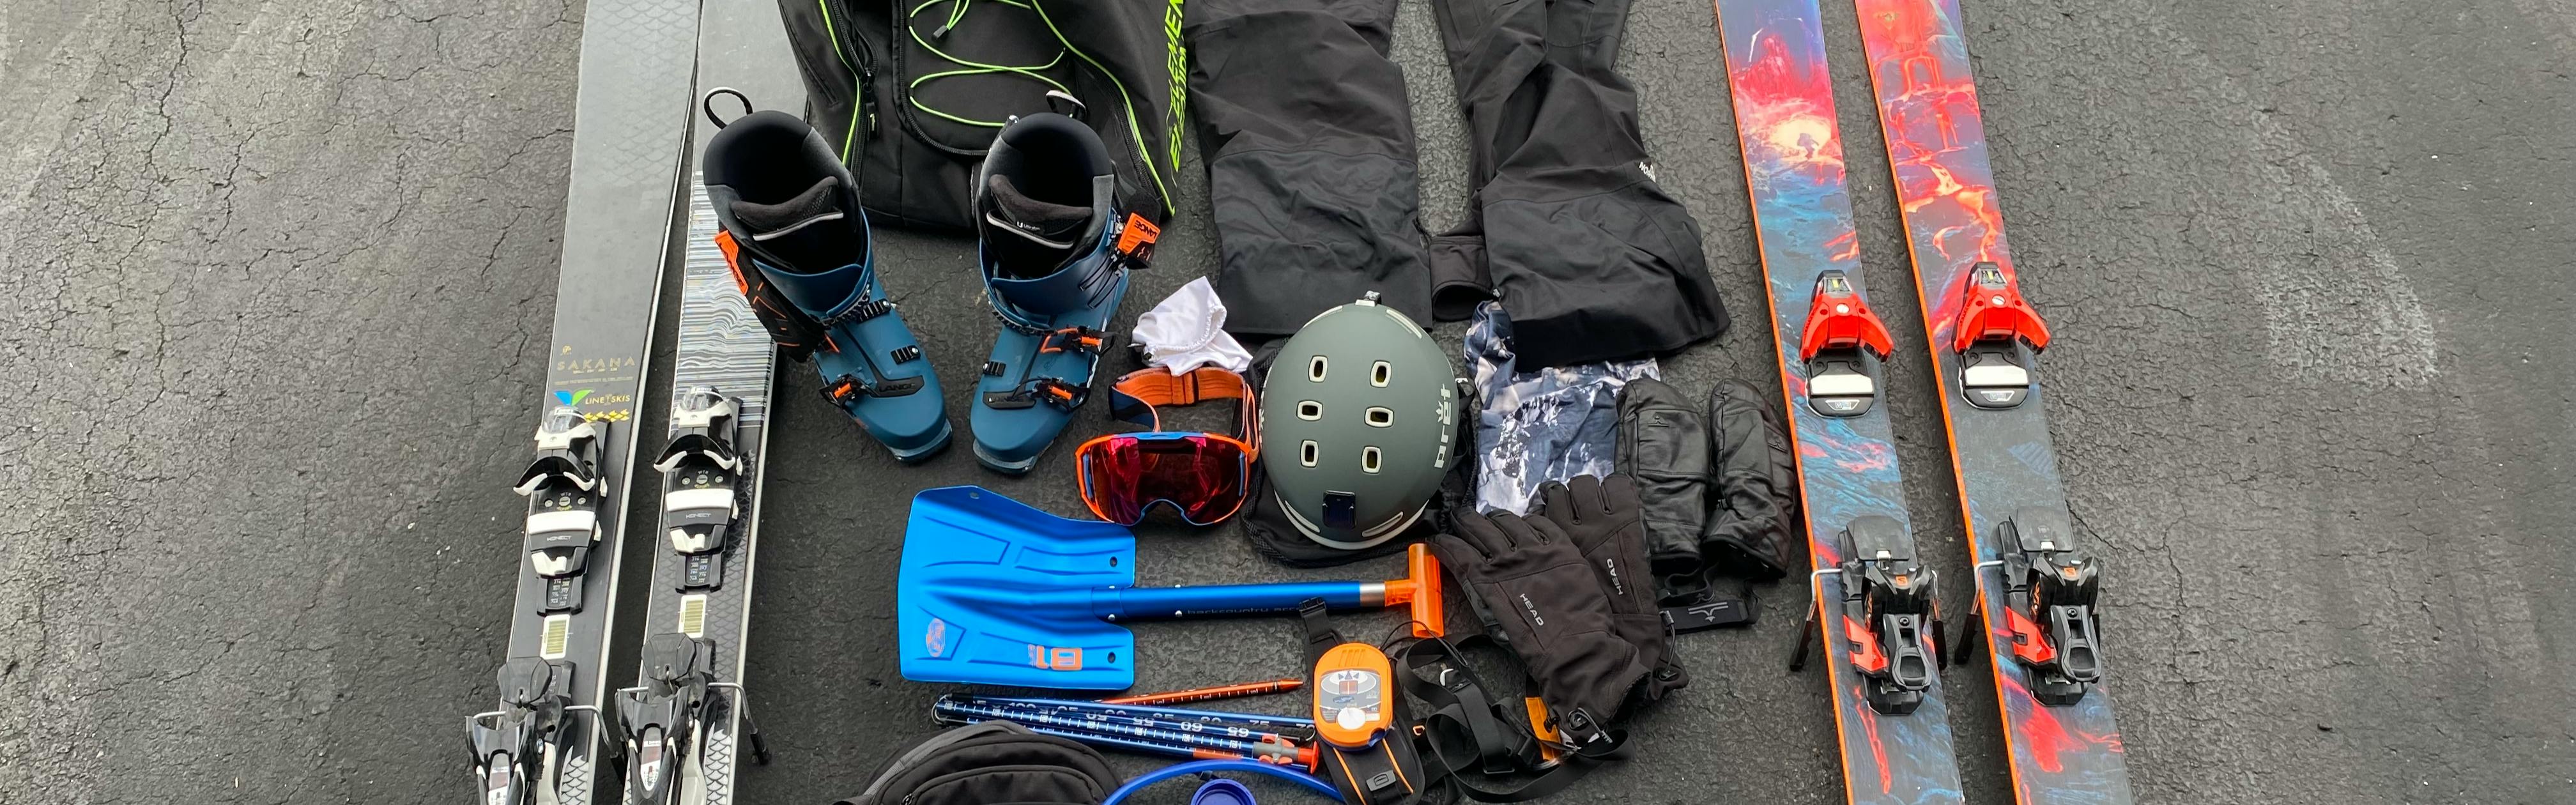 An image of the author's snow pants, helmet, shovel, goggles, gloves, buff, boot bag, 2 pairs of skis, and ski bag laying on asphalt. 